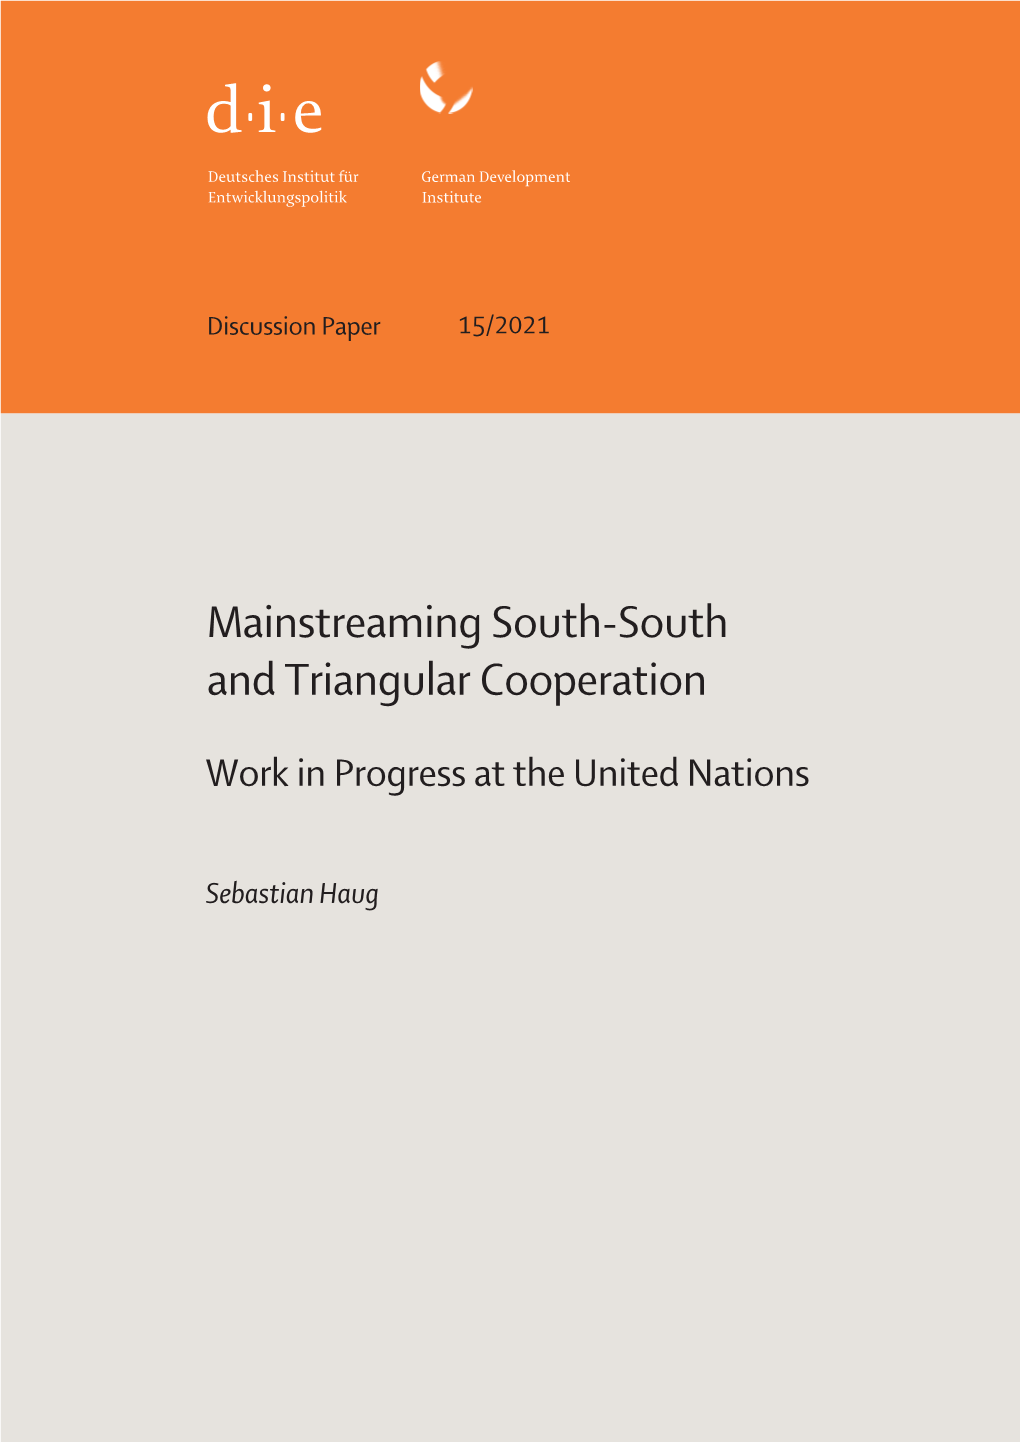 Mainstreaming South-South and Triangular Cooperation: Work in Progress at the United Nations